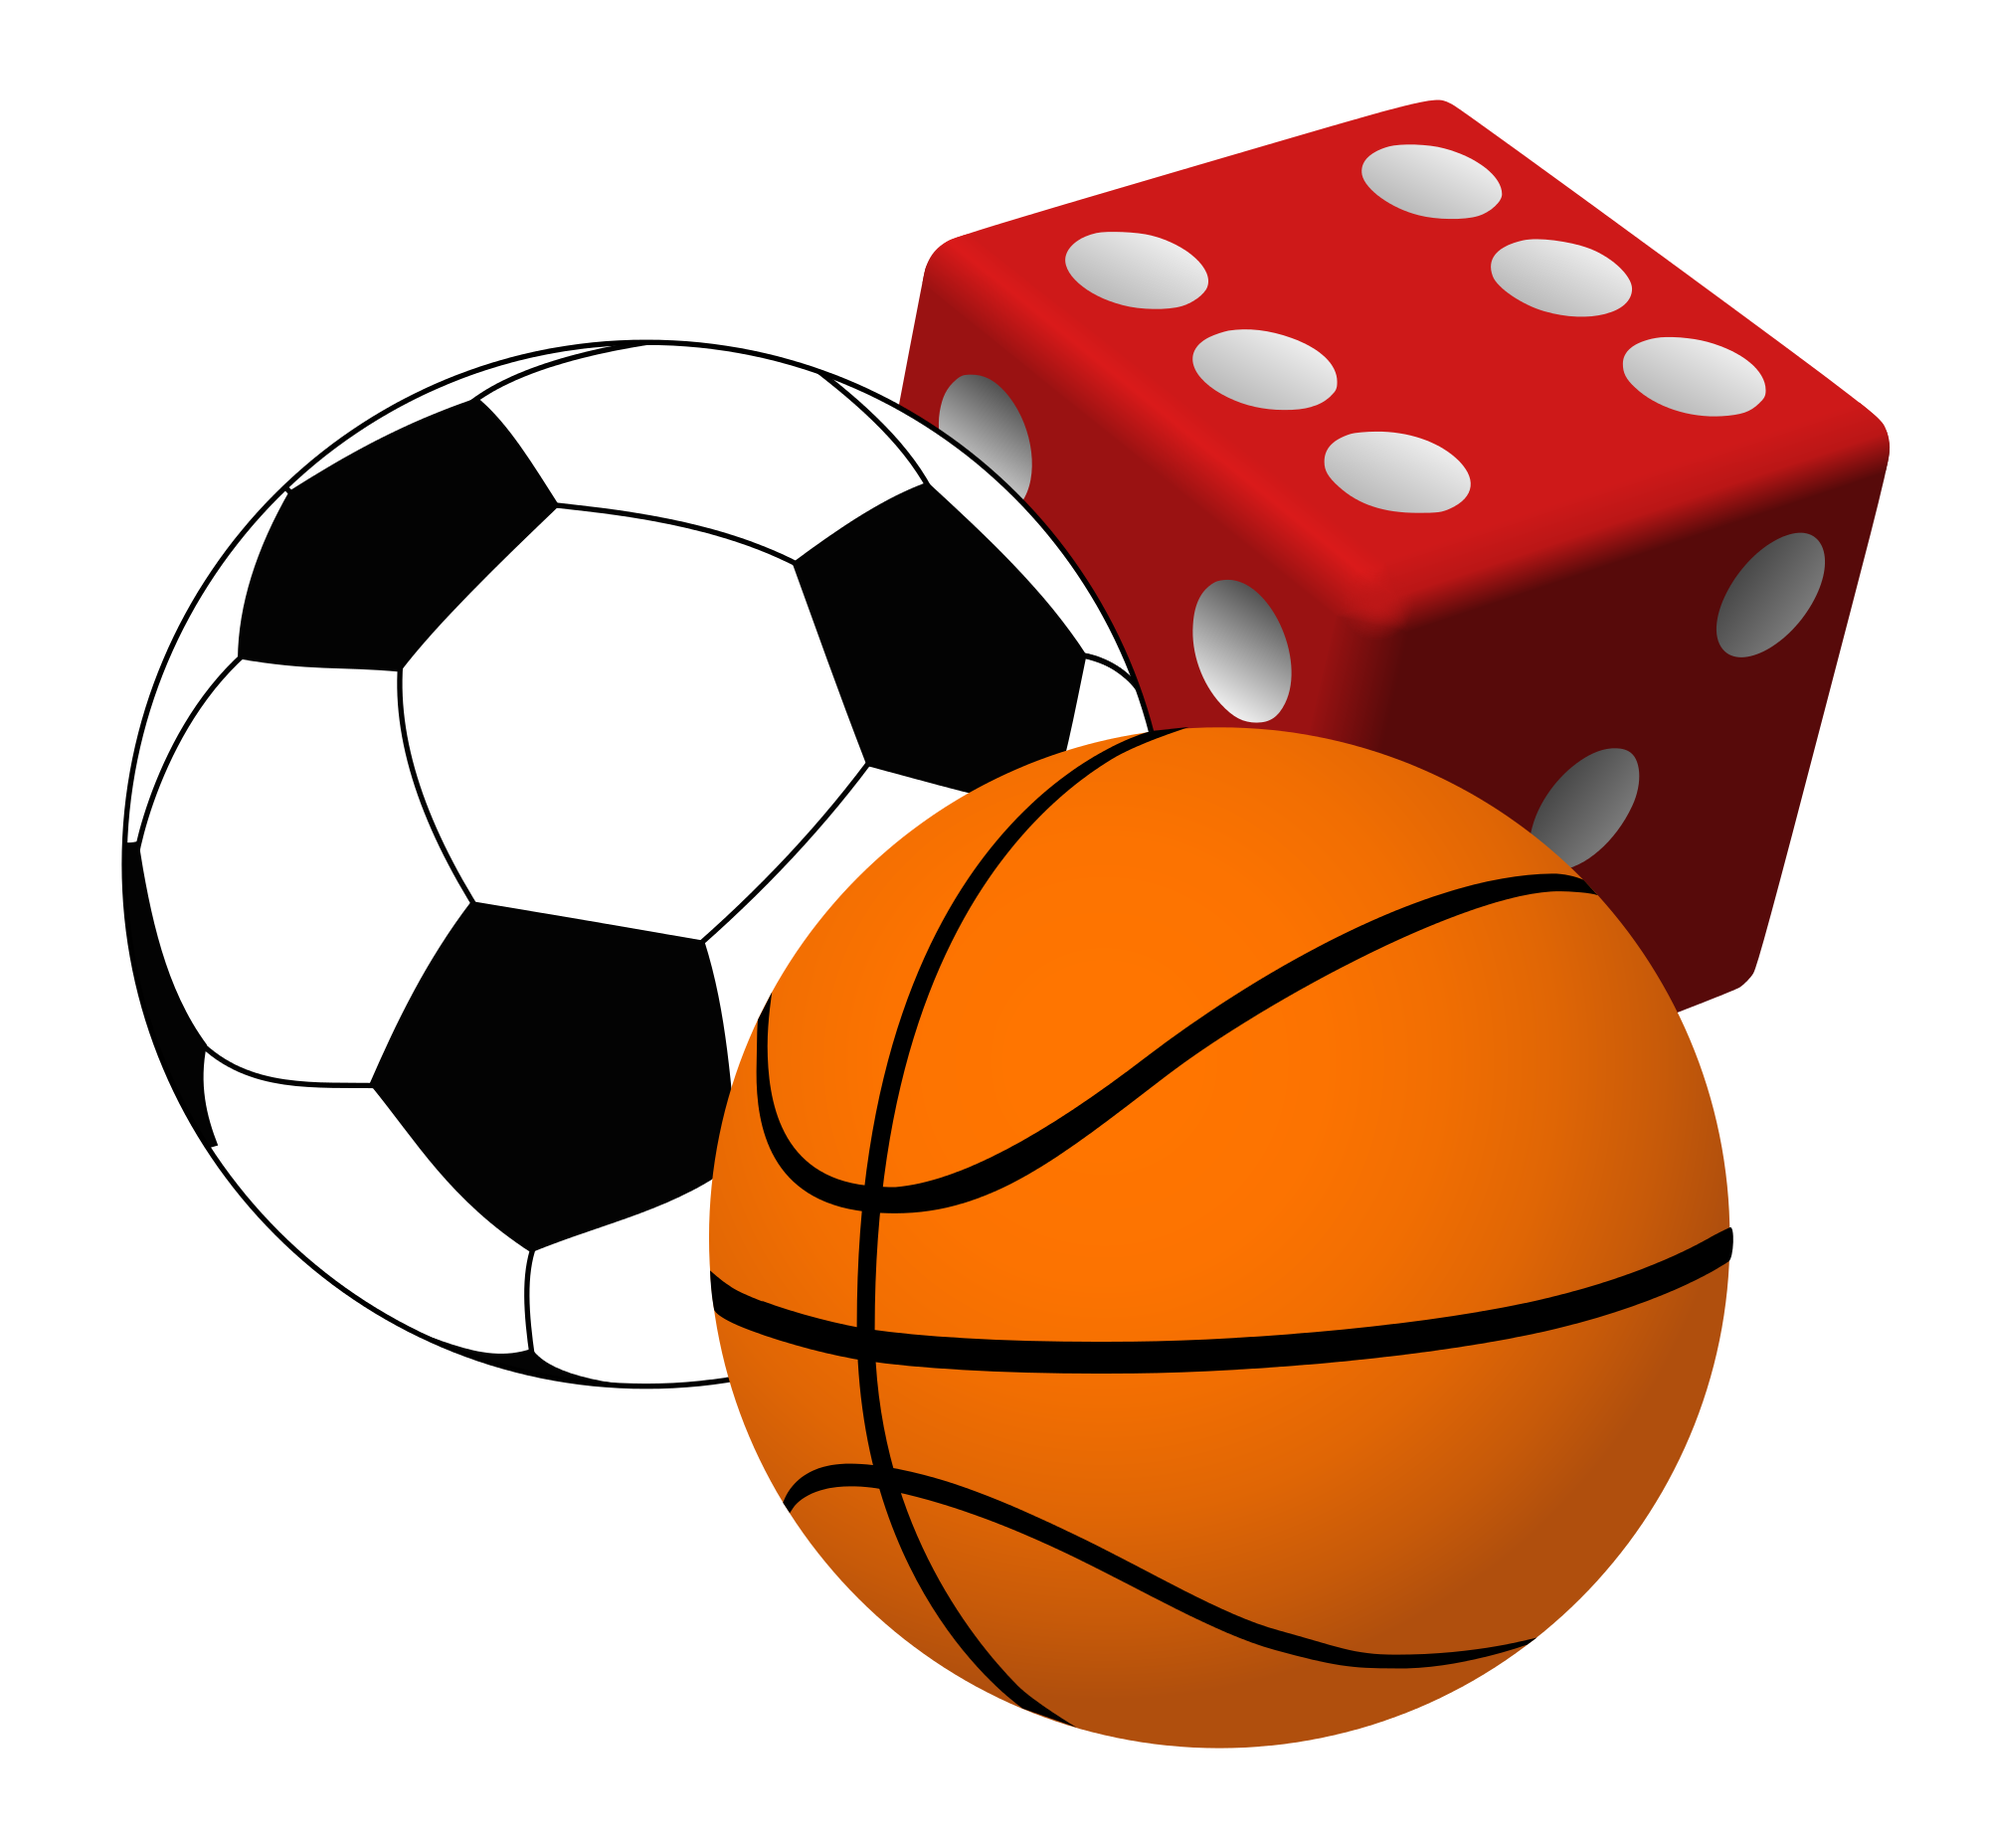 games clipart sport game